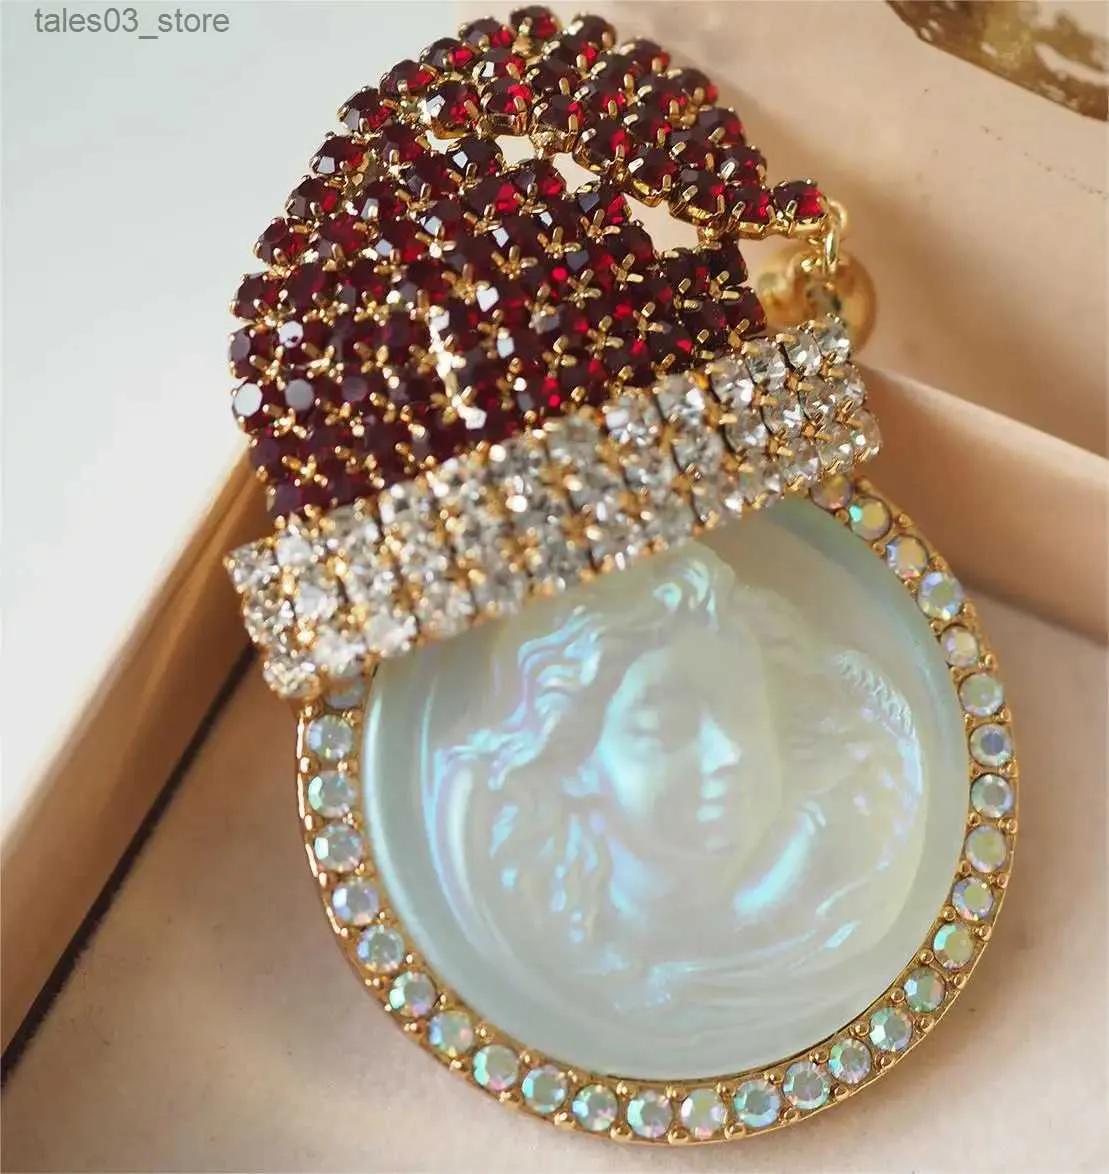 Light Luxury Santa Hat Angel Corsage Vintage Diamond Brooch Multi Color  Clothing Accessory Q231107 From Tales03, $10.79